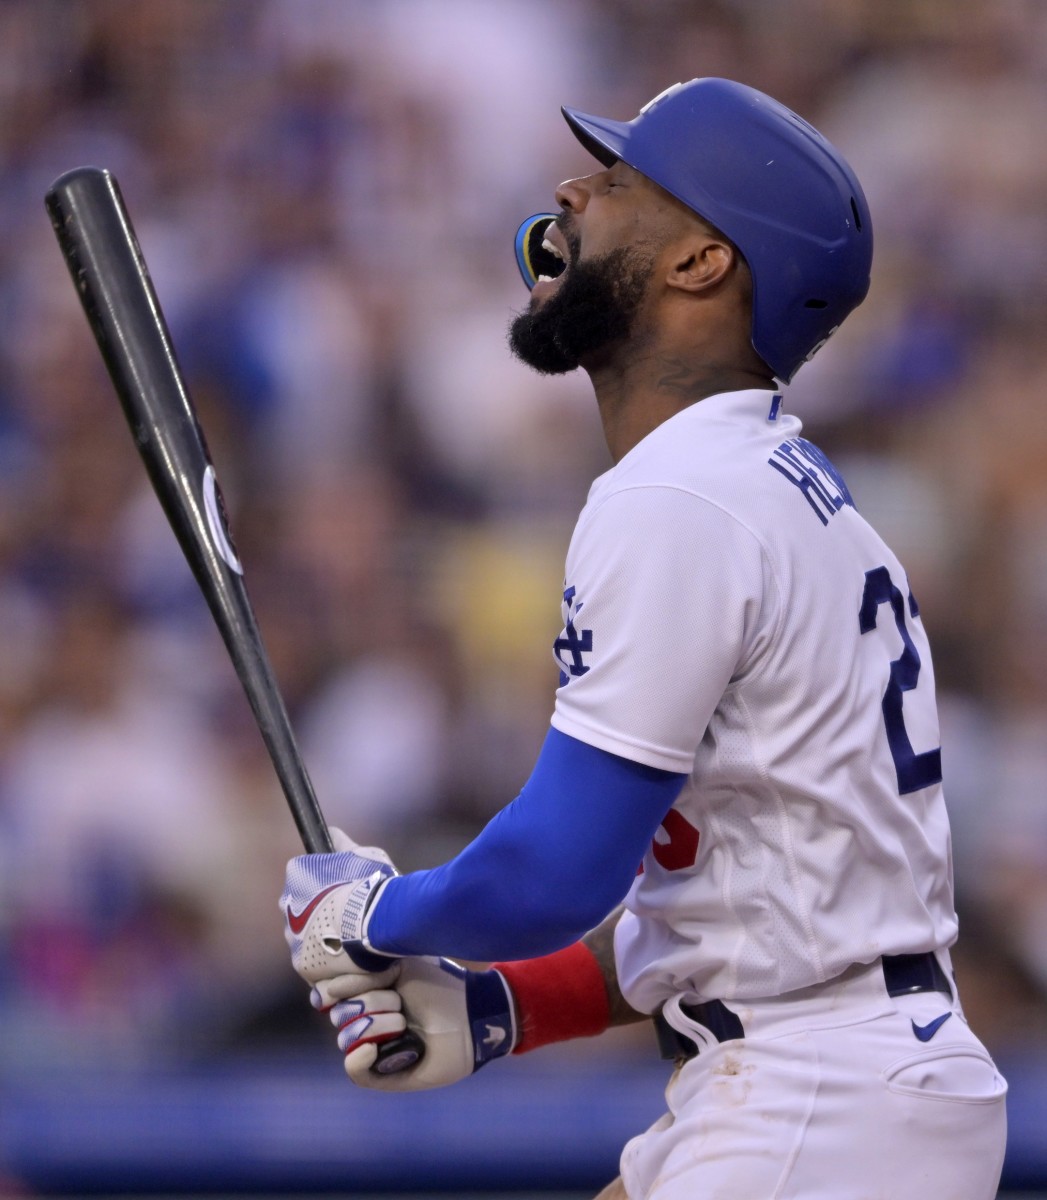 Dodgers News: Watch Jason Heyward Snap His Bat in Half After Popping Out  Against the Yankees - Inside the Dodgers